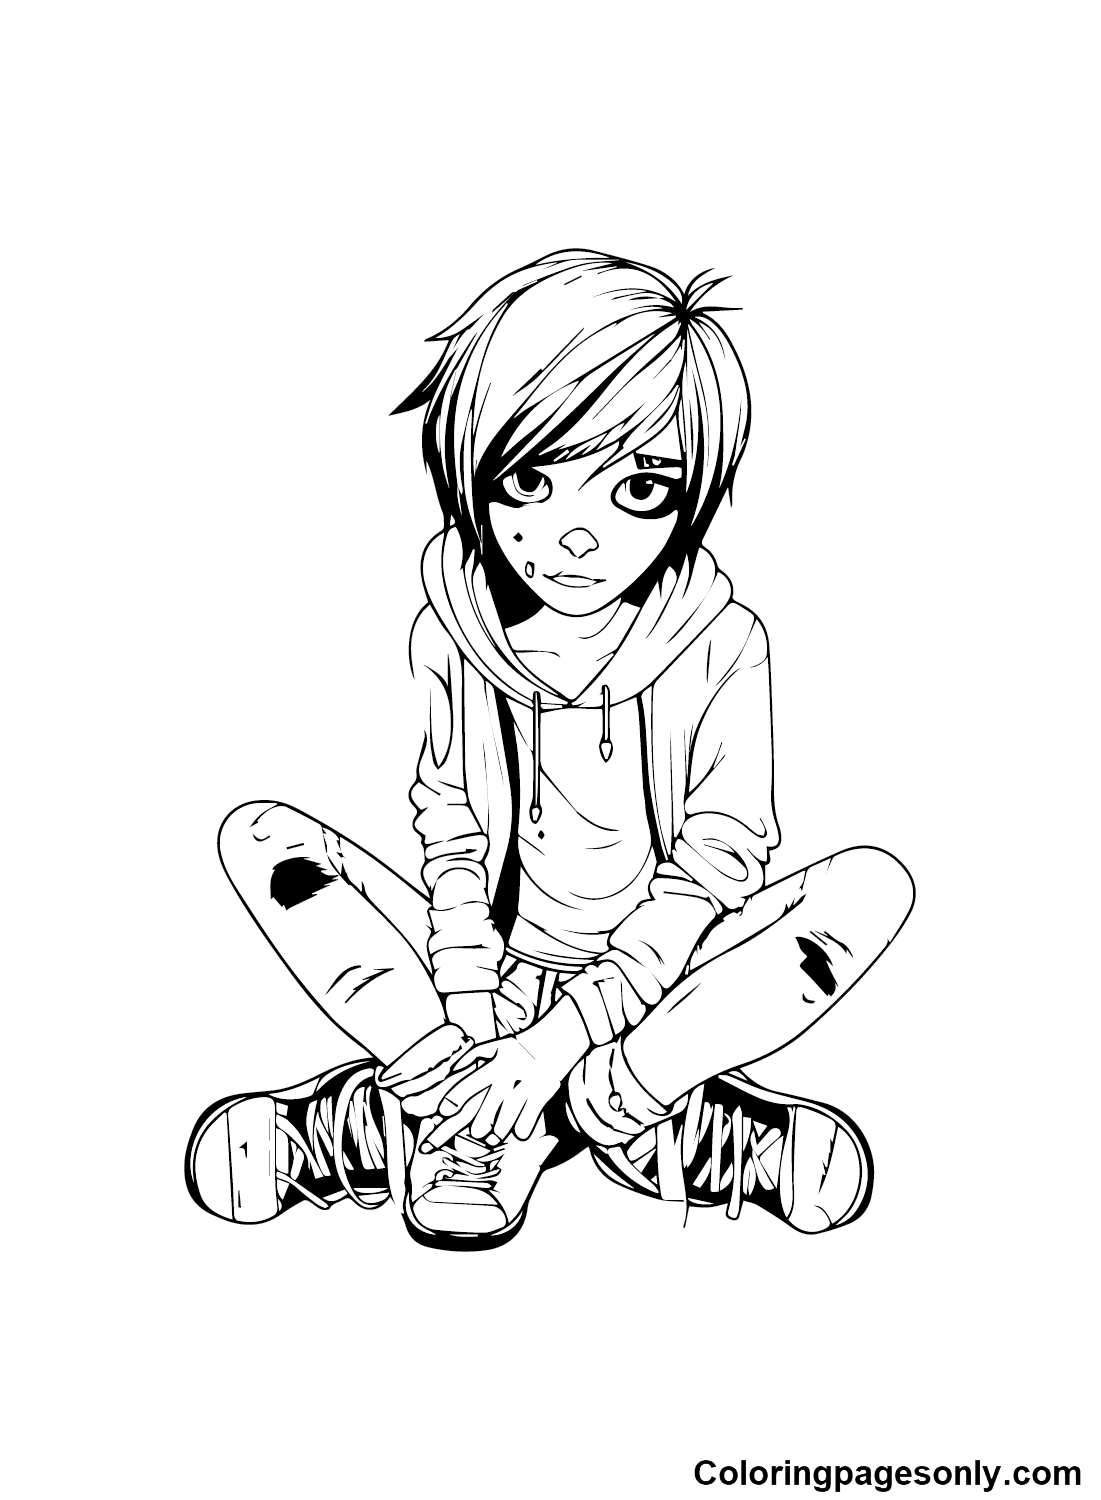 Emo to Print Coloring Pages